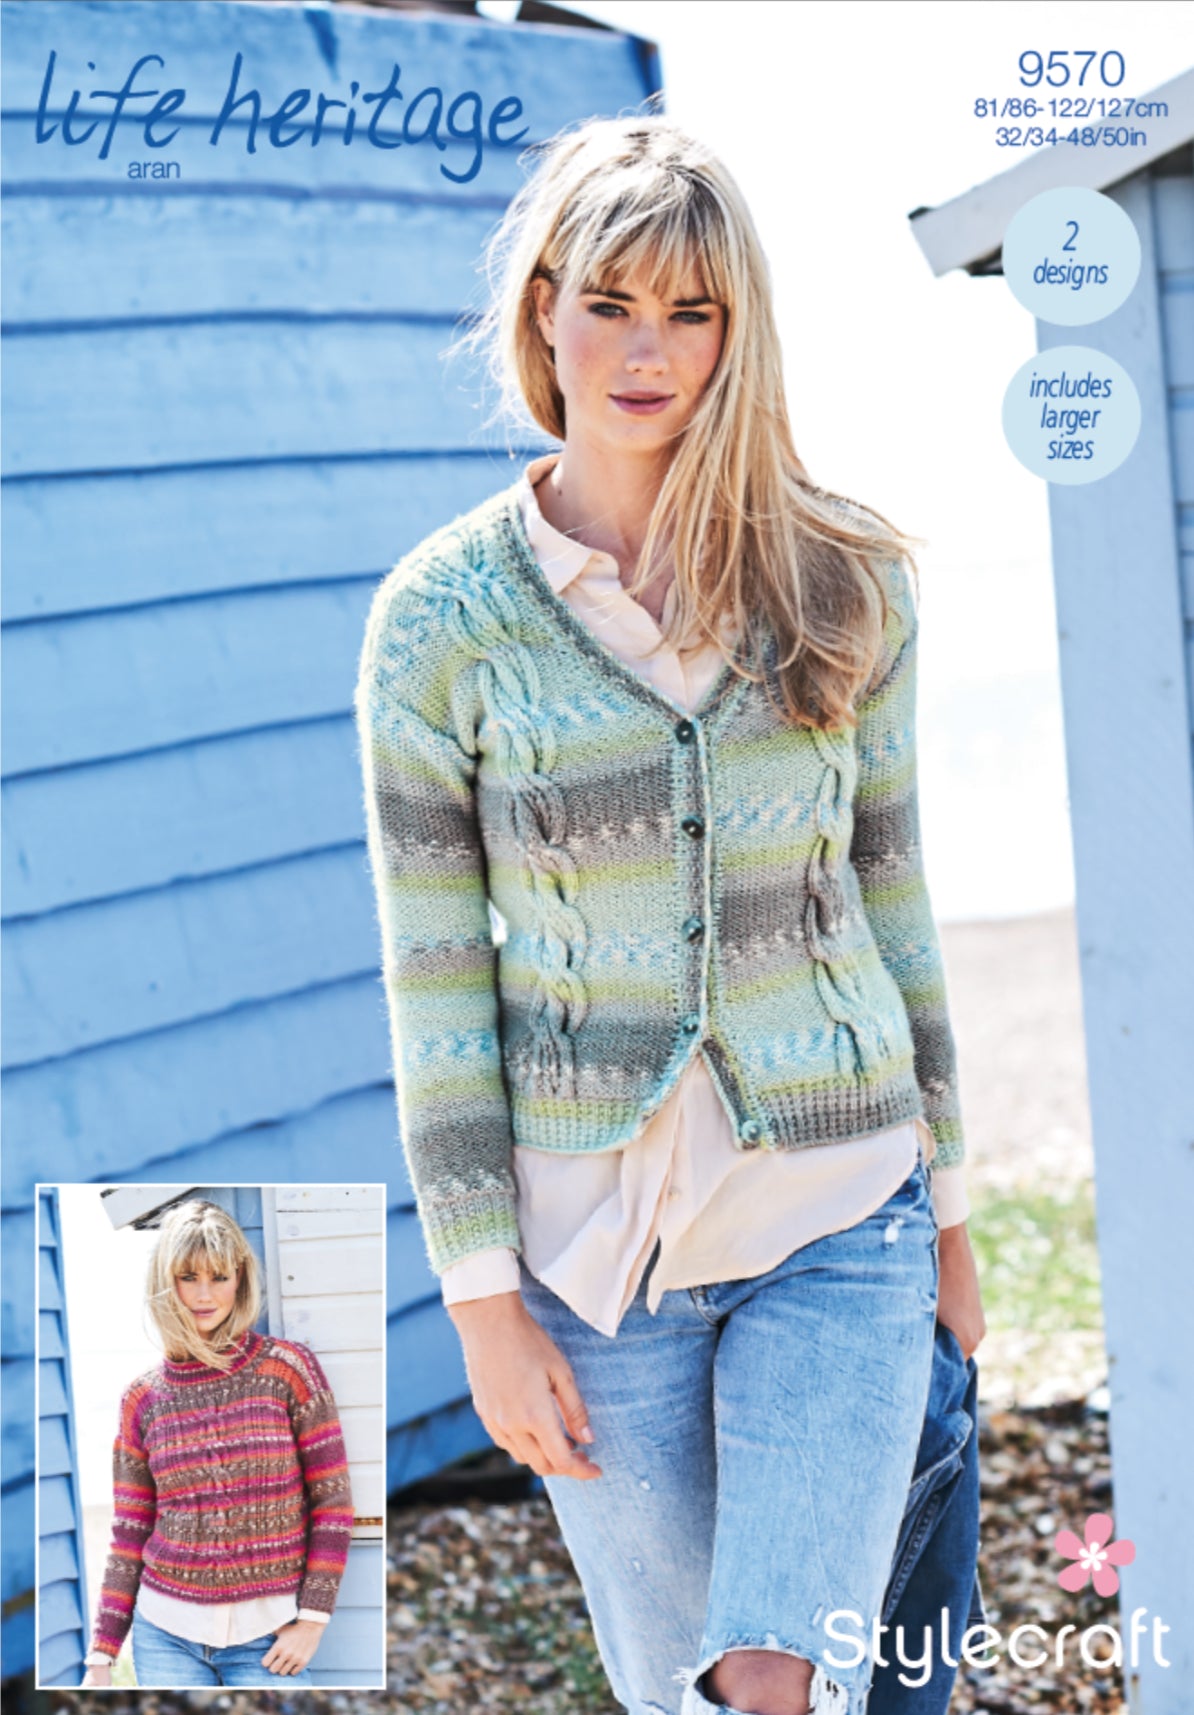 Stylecraft 9570 Cabled Sweater and Cardigan in Aran